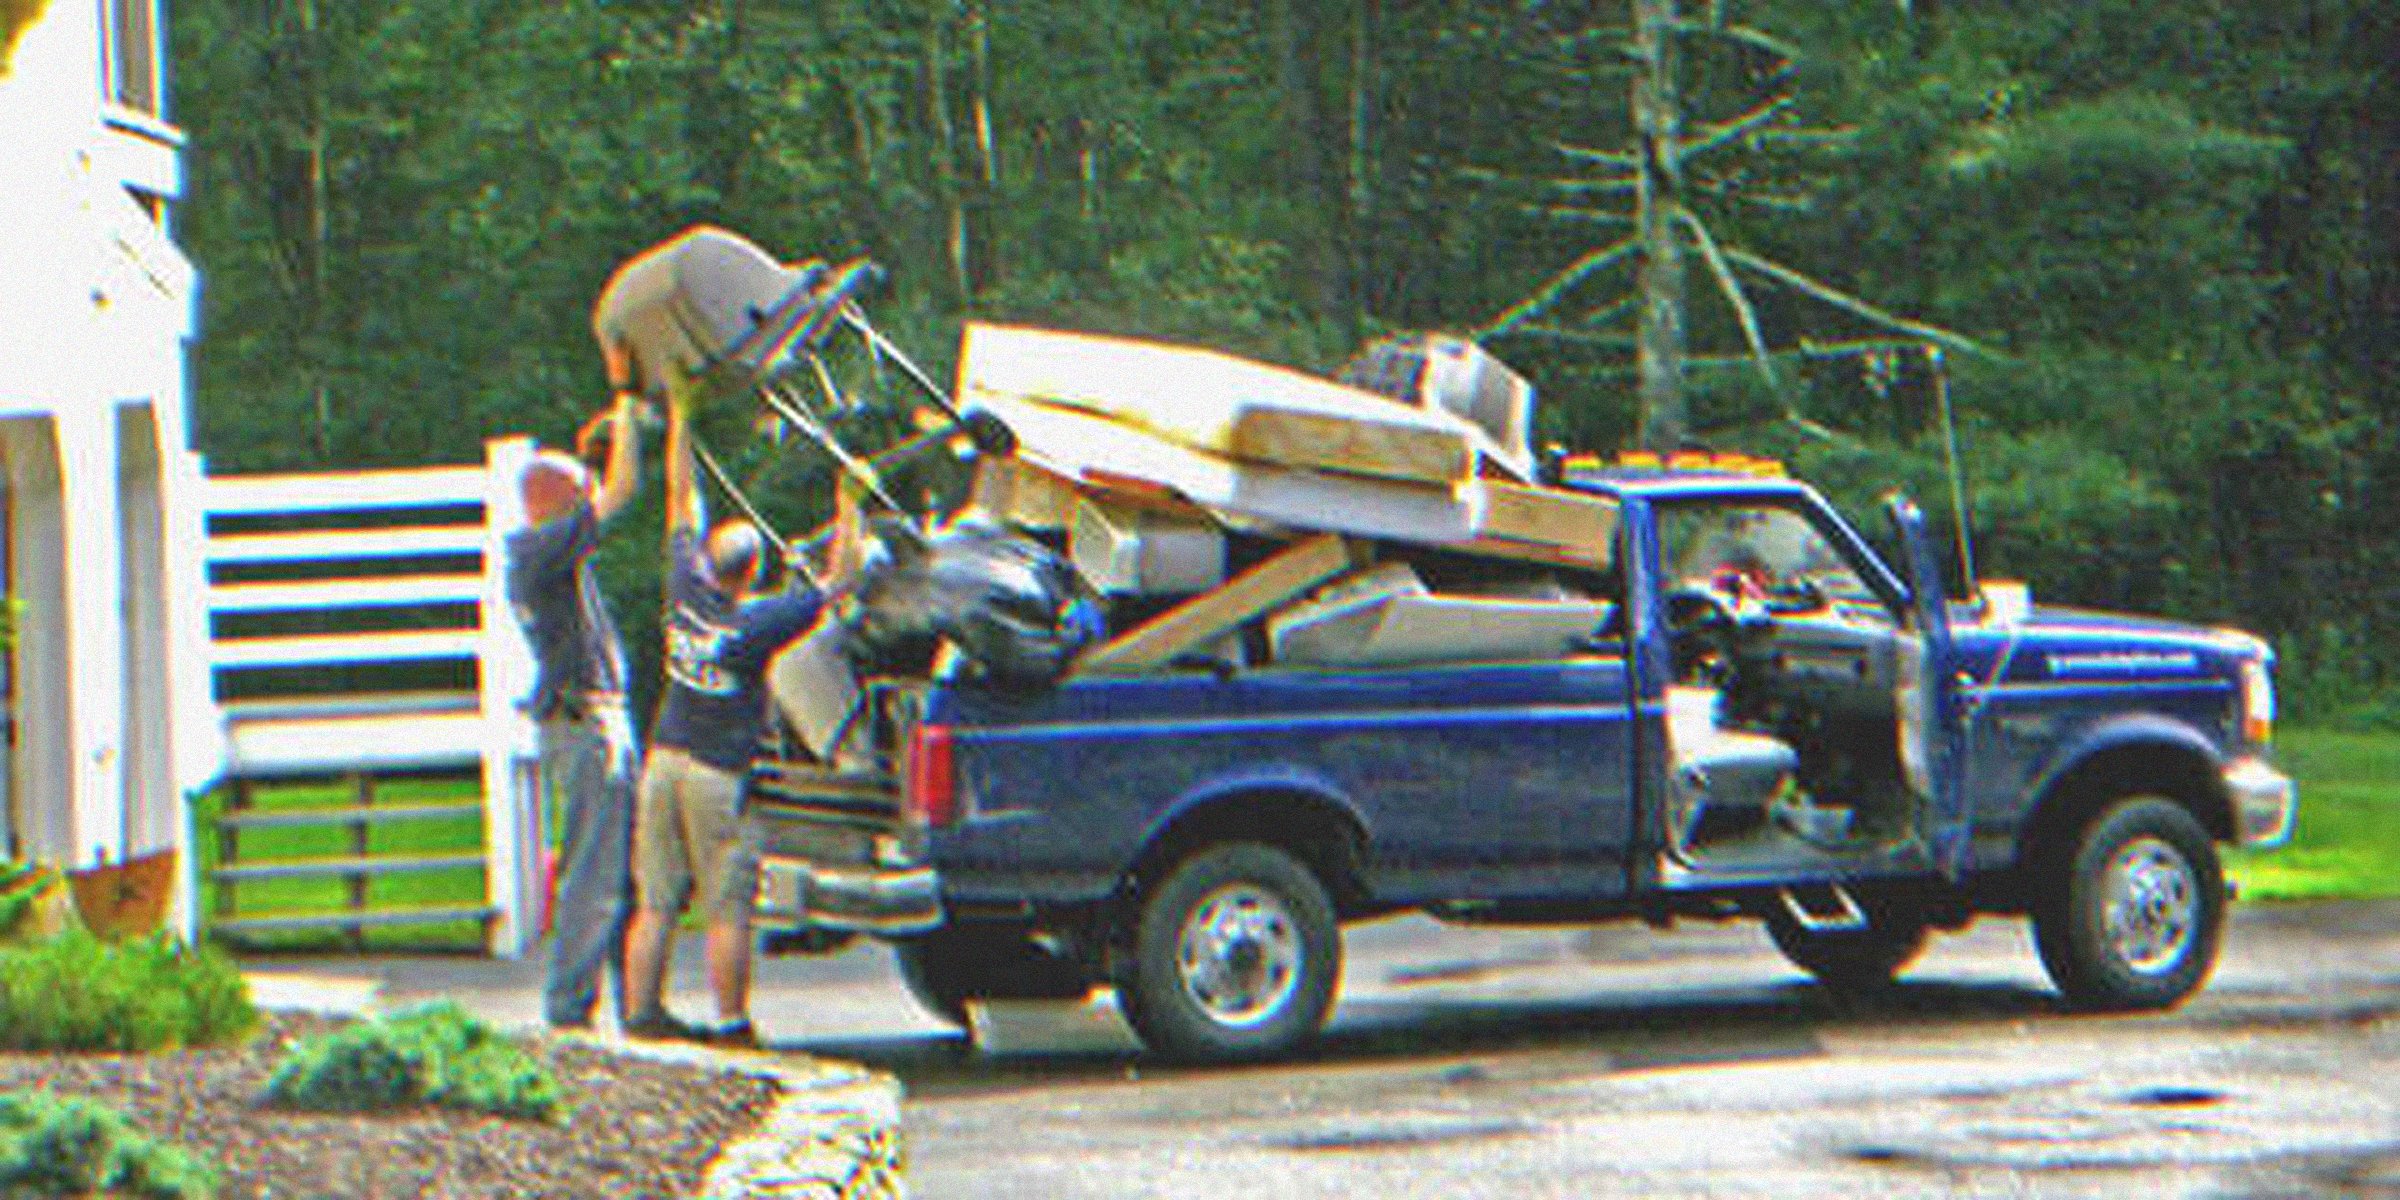 Men unloading furniture from a moving truck | Source: Flickr/cambodia4kidsorg (CC BY 2.0)